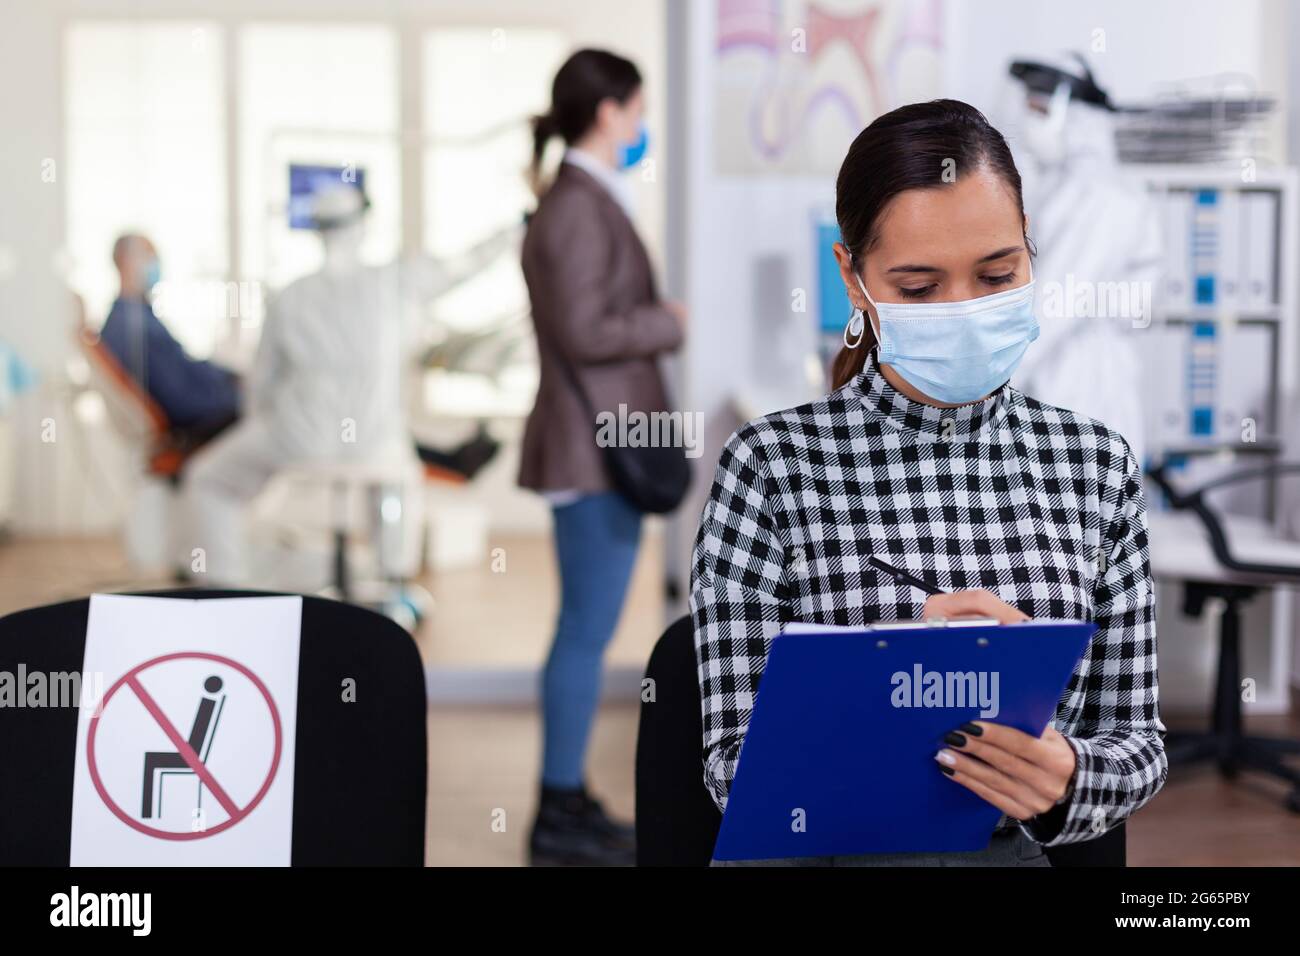 Stomatology patient in denstiry wainting area filling form before consultation with dentist dressed in ppe suit as safety precation agasint infection with coronavirus during global outbreak. Stock Photo